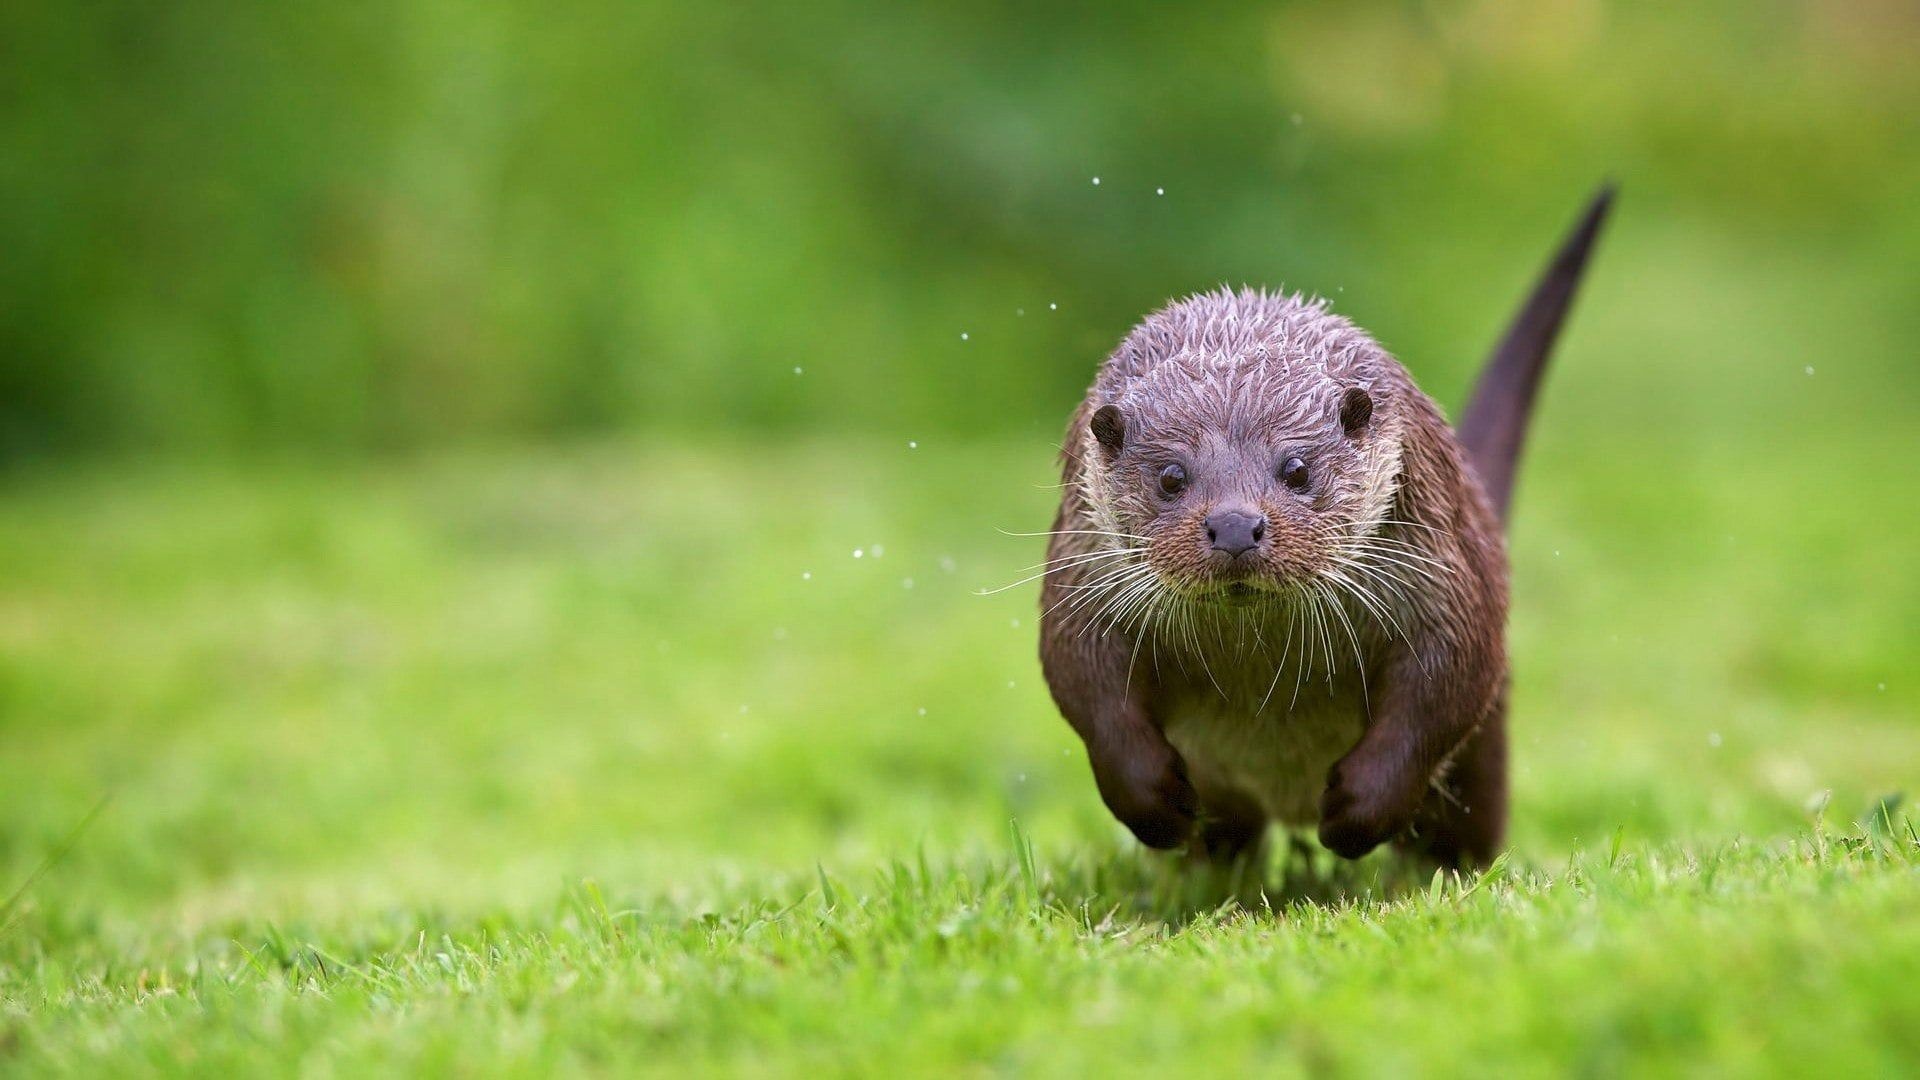 HD otter wallpapers, Stunning wildlife portraits, Nature's acrobats, Admire their agility, 1920x1080 Full HD Desktop